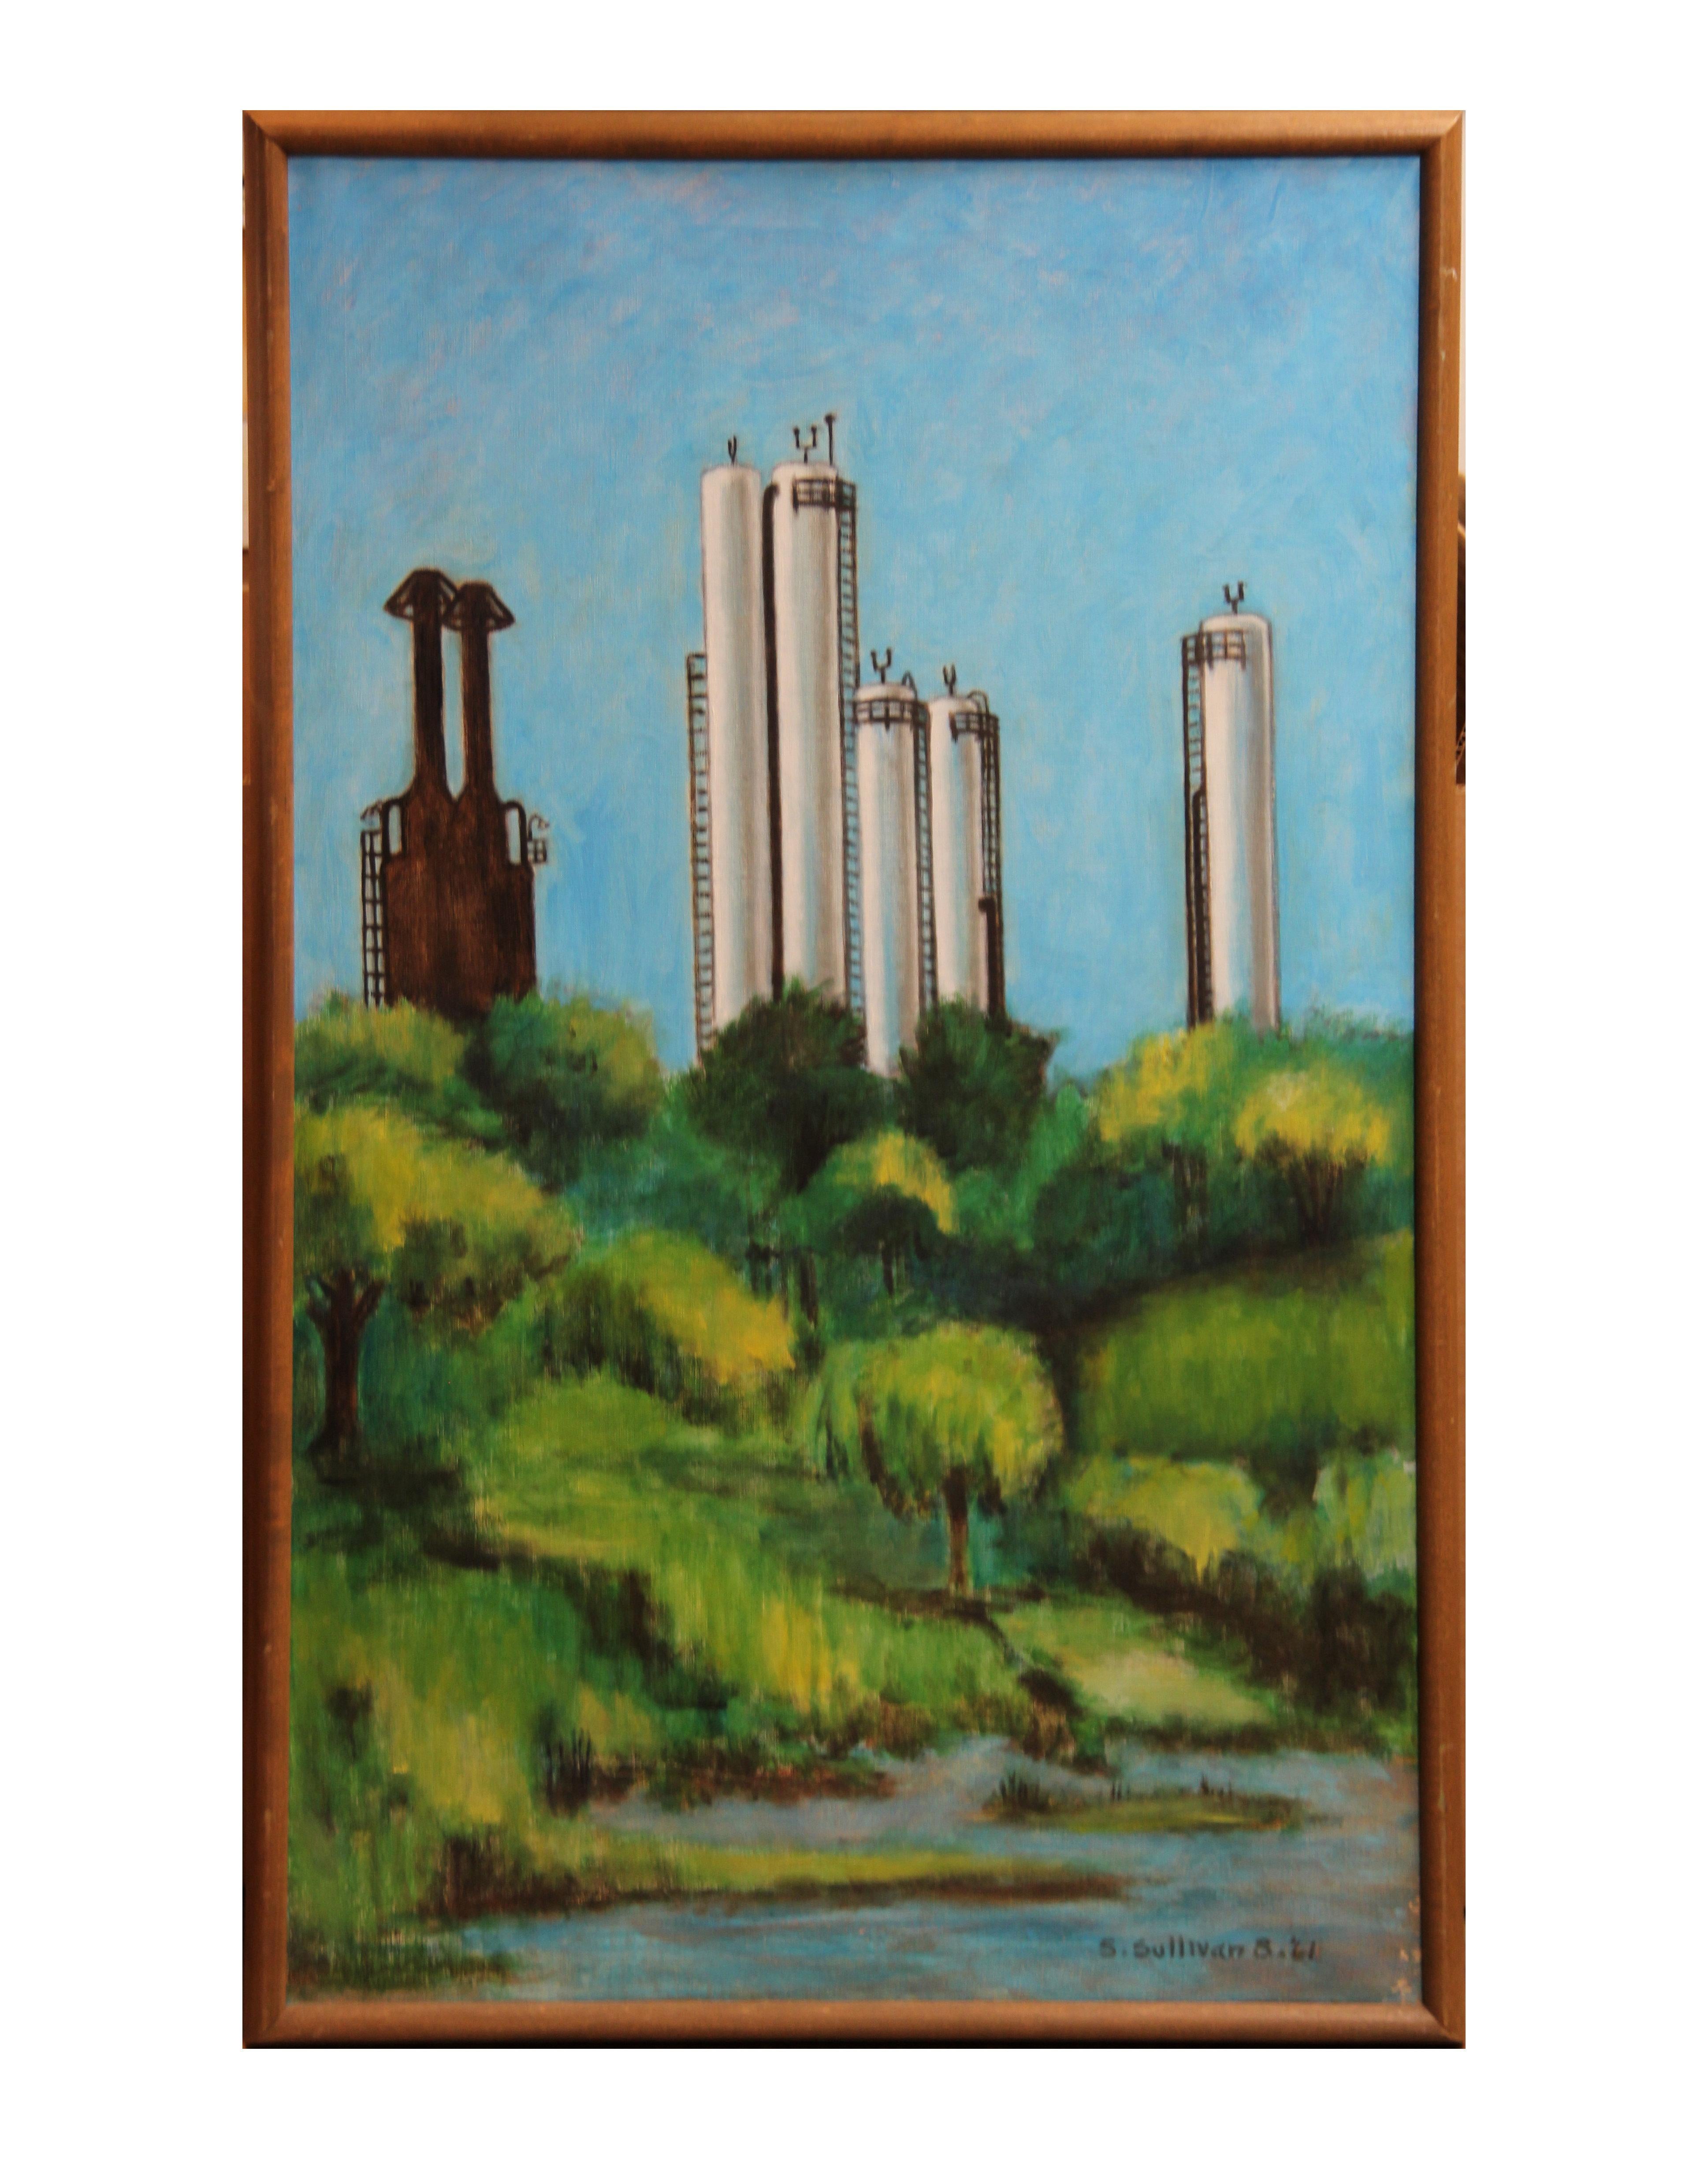 Stella Sullivan Abstract Painting - "Refinery at Barbours Cut" Impressionist Landscape Painting